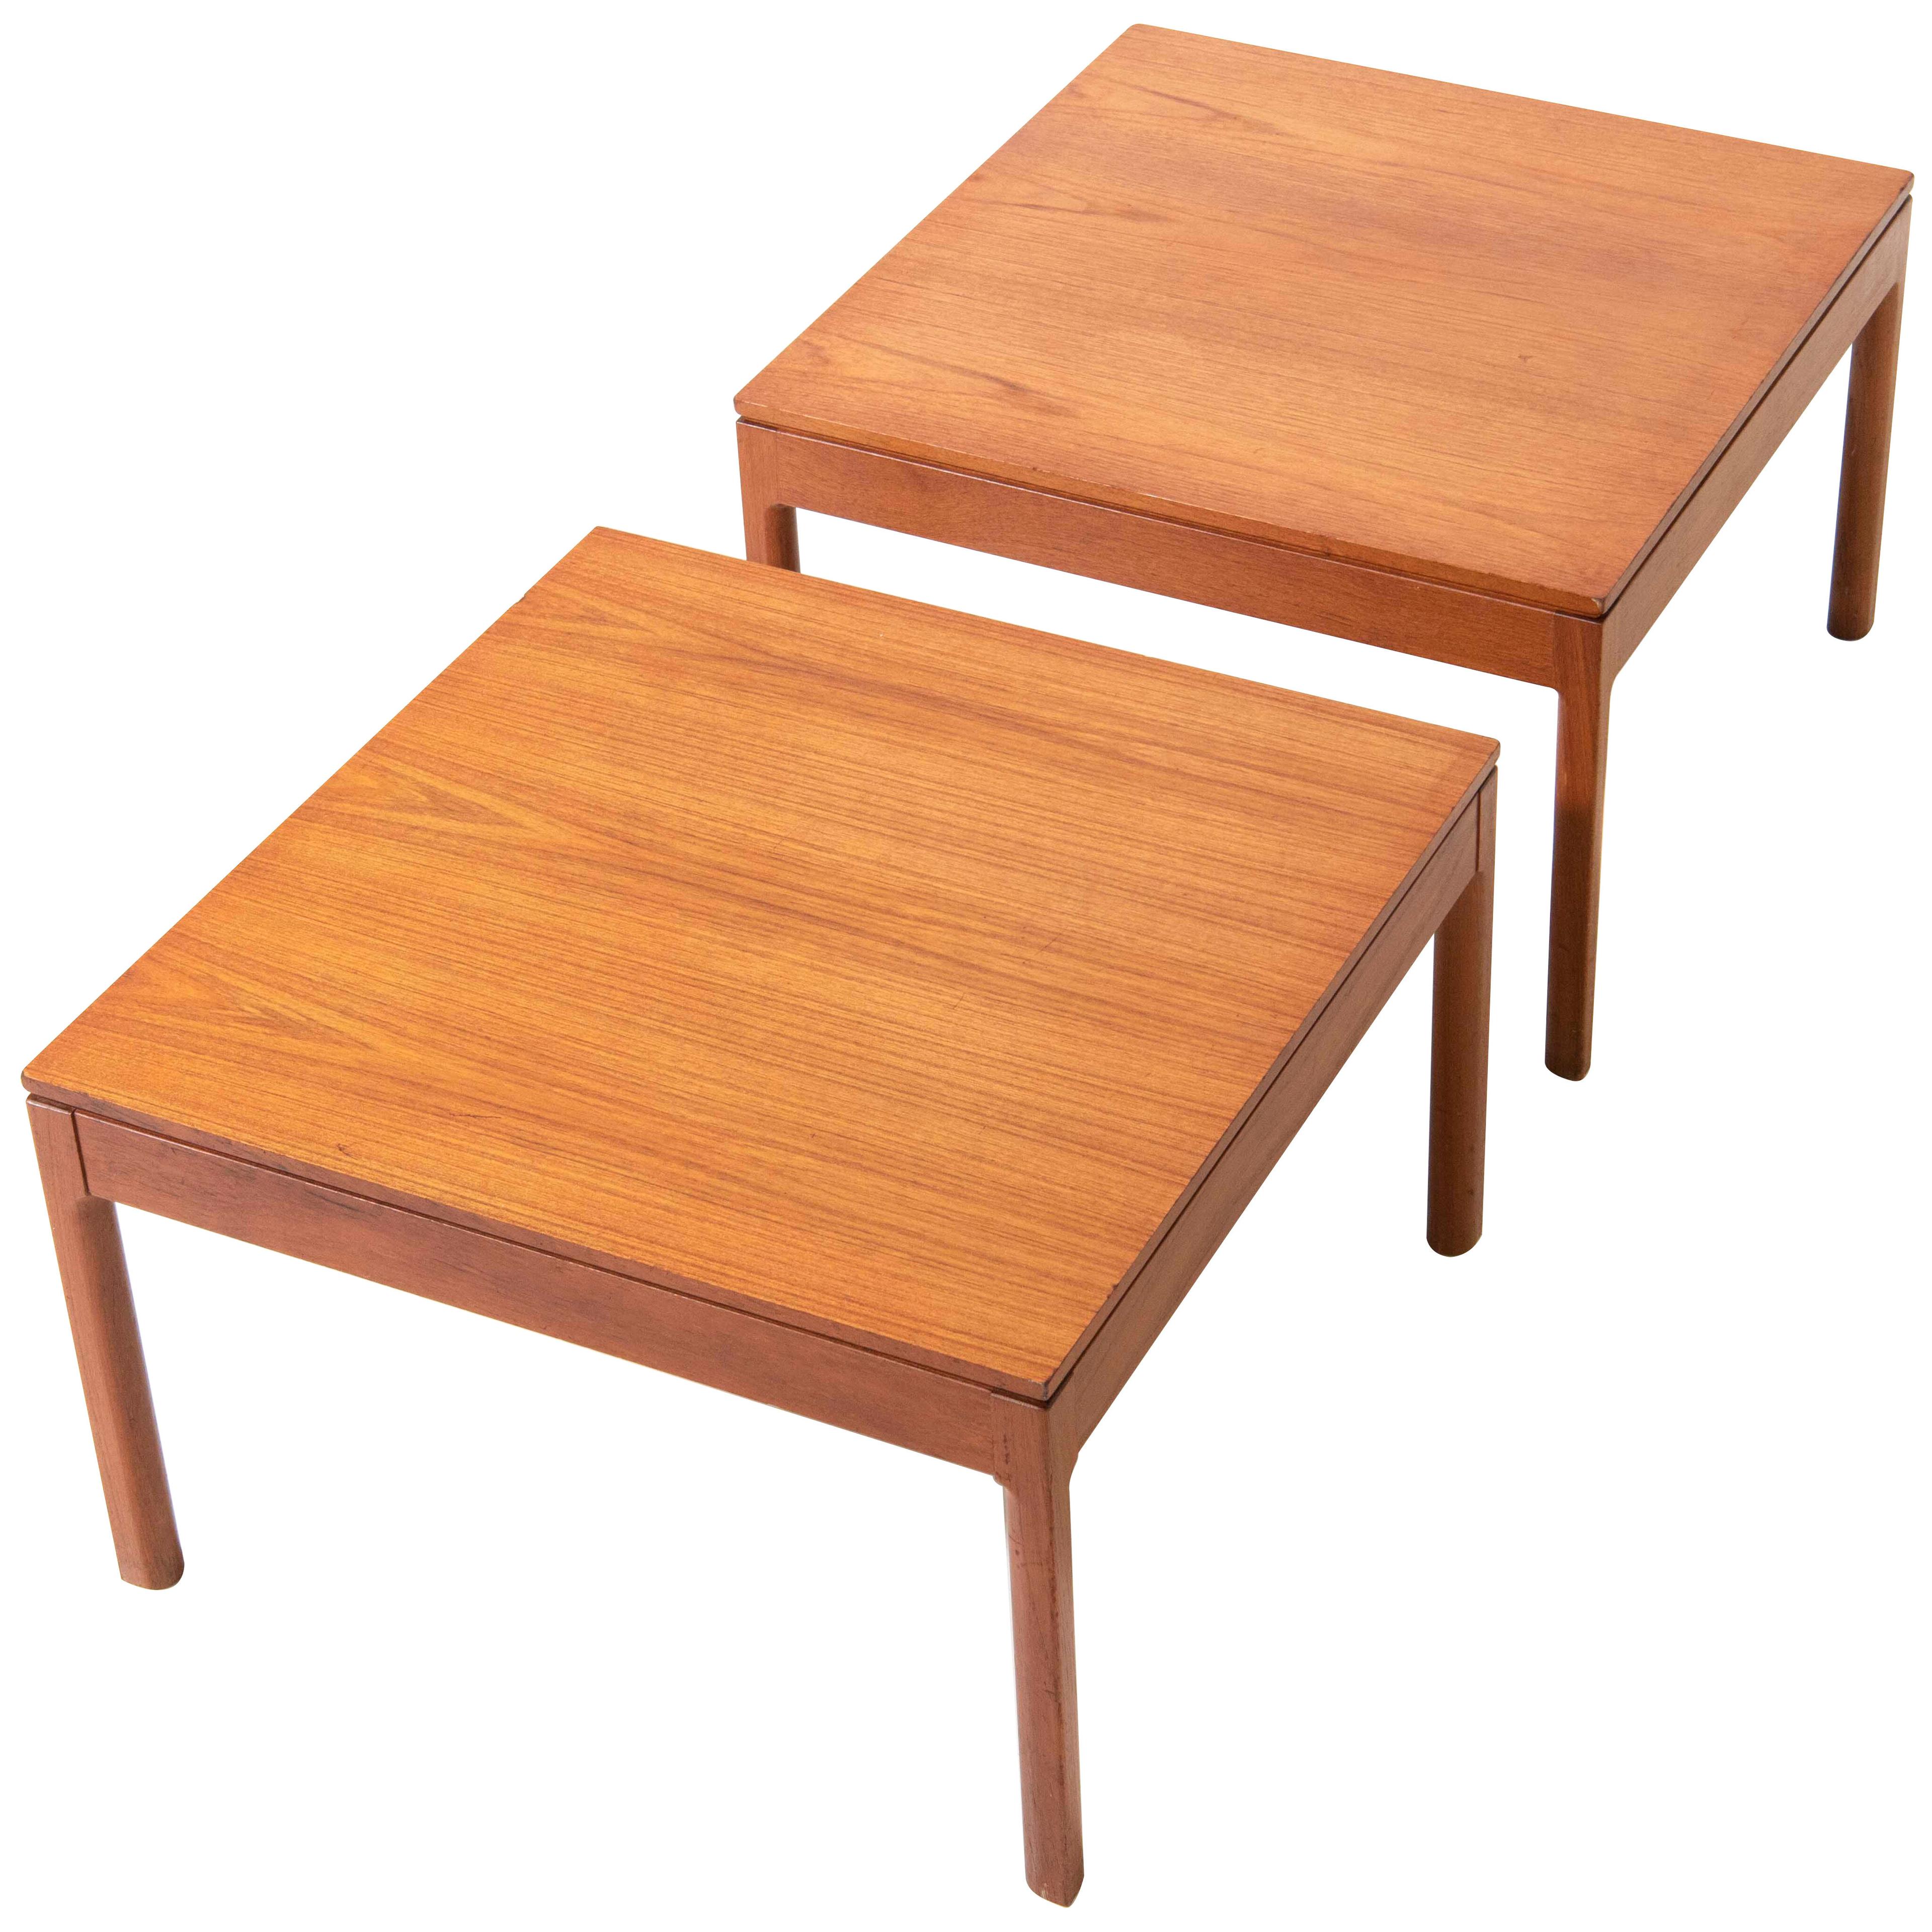 A set of Two Side Tables in Teak - 1950's